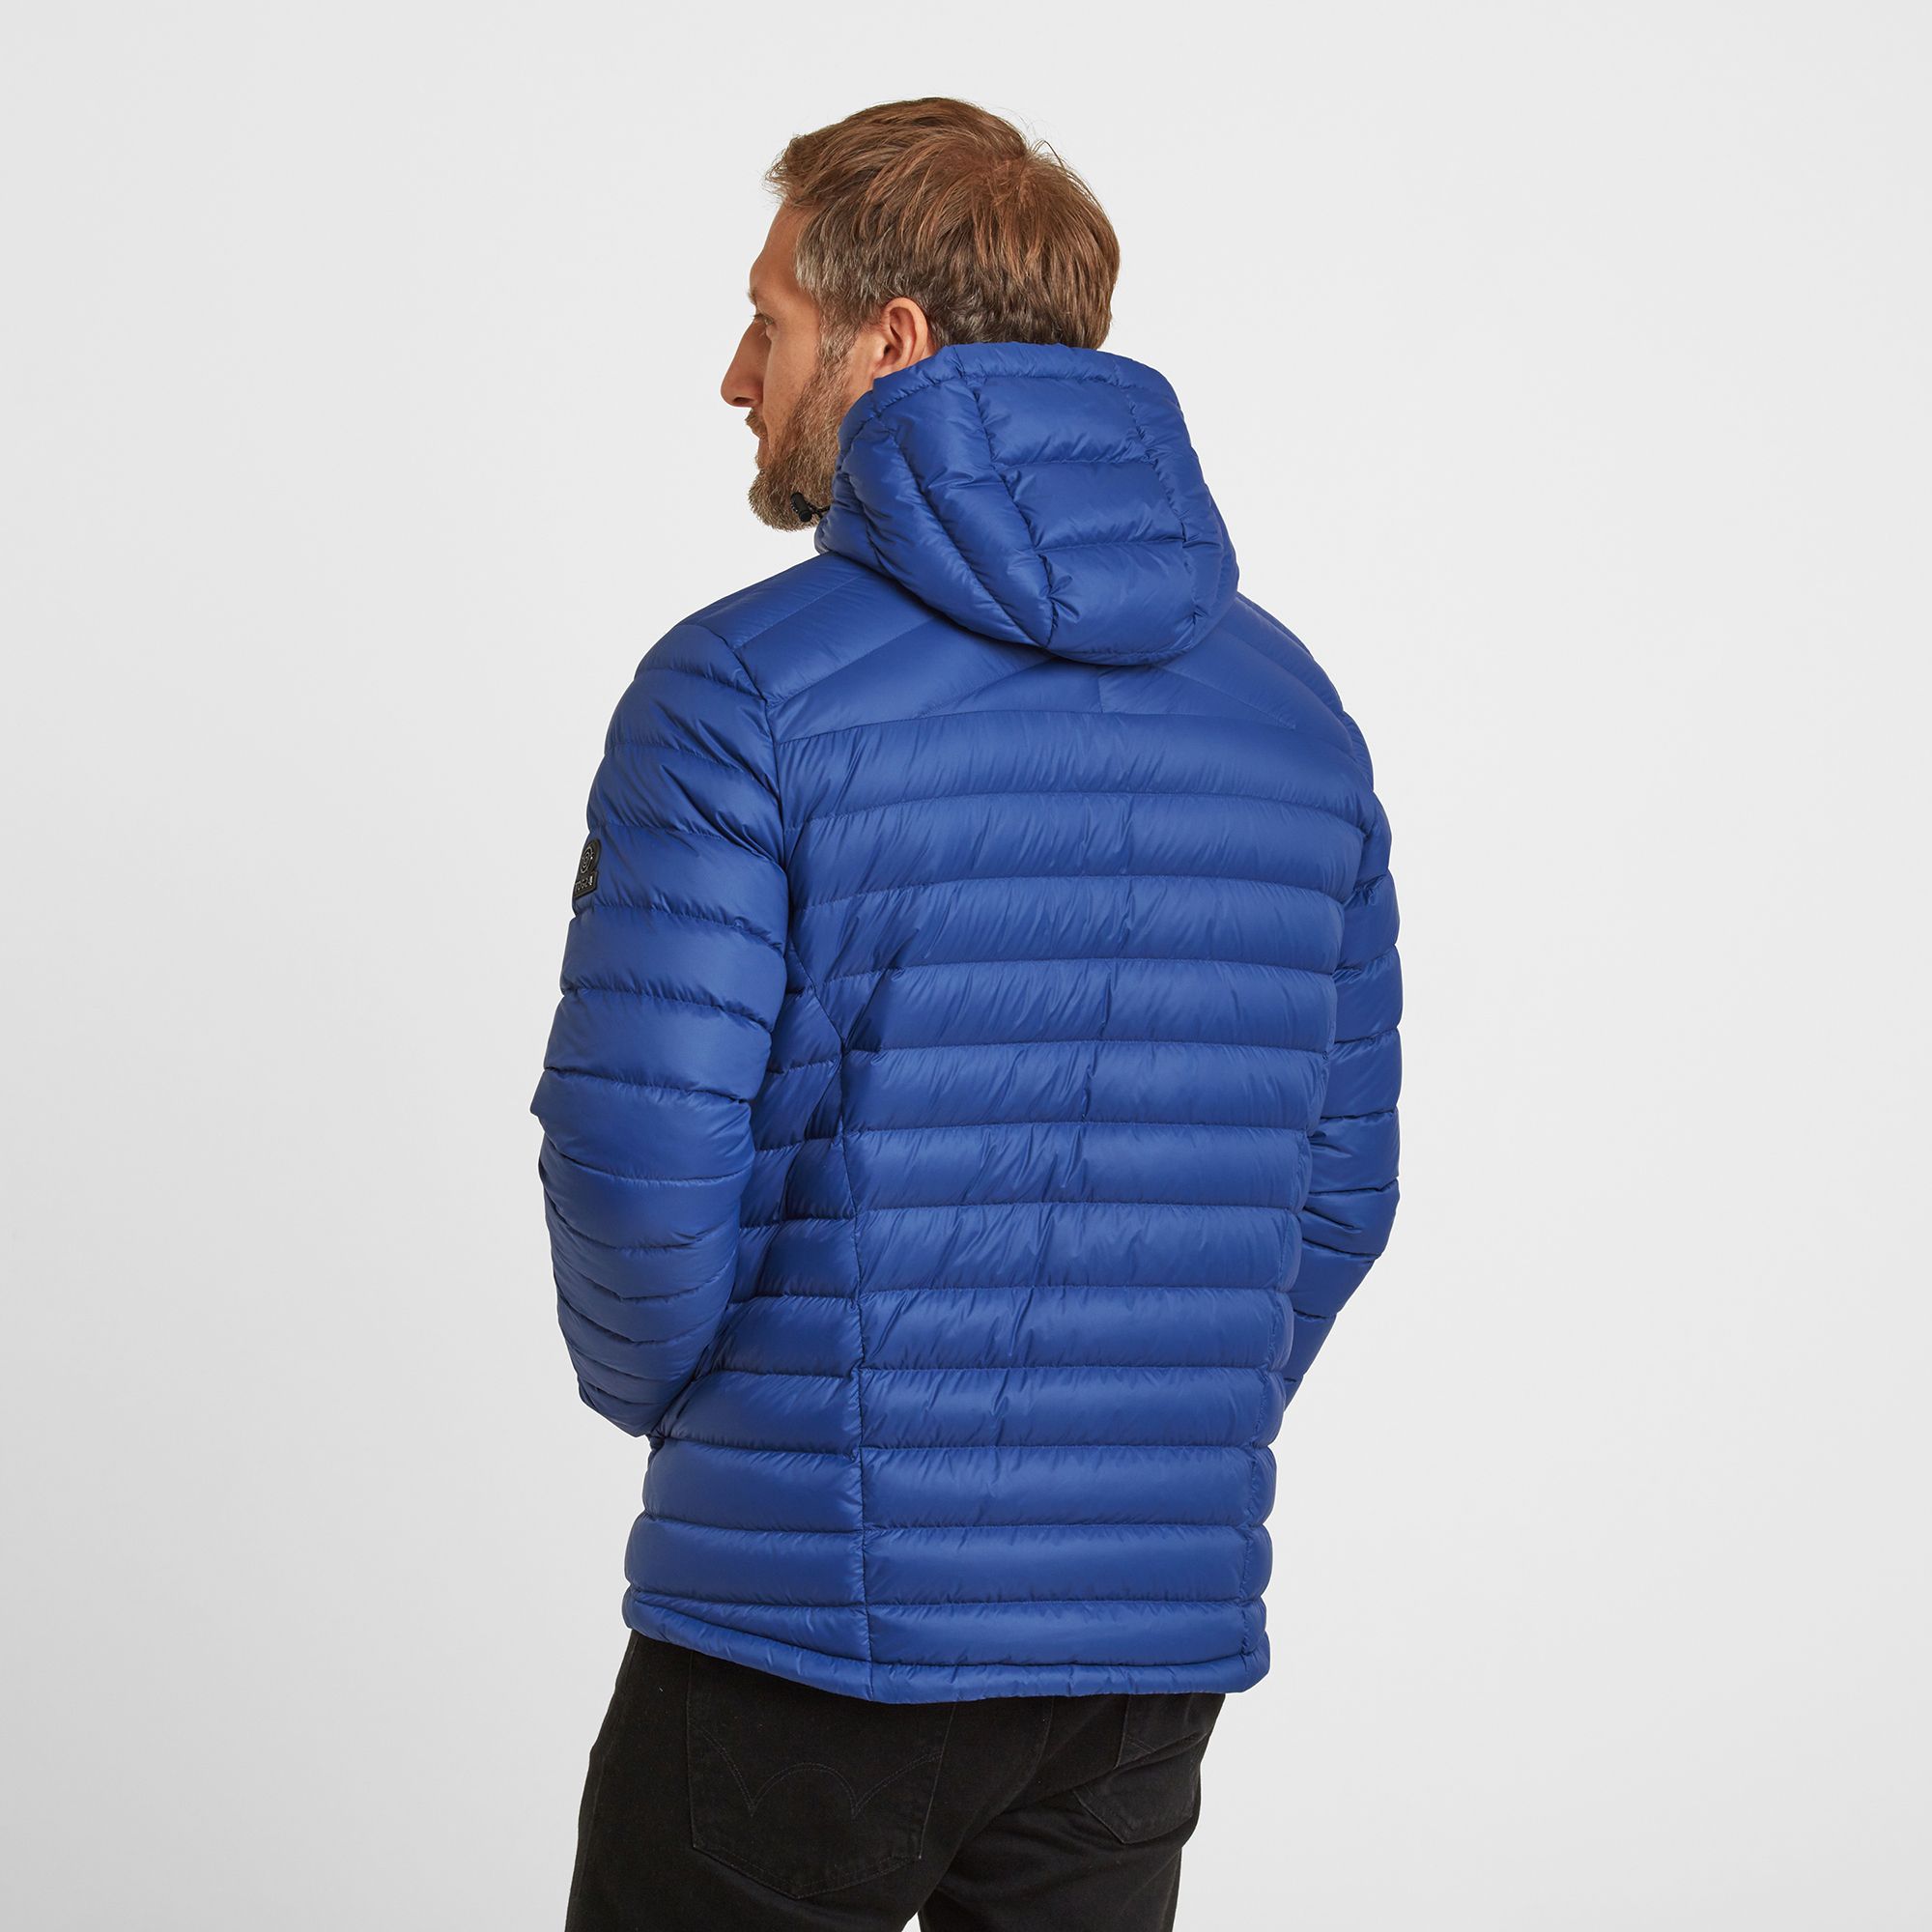 Perfect for adding a layer of warmth without any bulk, our Drax down filled mens jacket with adjustable hood feels silky-soft, incredibly light and packs down small into a zip up inside pocket. You'll have no trouble finding room for it in your case when you go away, and it also makes a handy travel pillow. This padded jacket gets its incredible warmth from naturally insulating duck down that traps heat without being bulky. Quilted bands, a panelled cut and a hood that hugs your neck mean it feels as good as it looks, and it has thoughtful details like a soft chin cover over the top of the zip. Designed to squish down really small, then spring back into shape, Drax has roomy side pockets protected by an elasticated flap, light elastic at the cuffs and small toggle adjusters at the hem keep the chill out.  Designed in Yorkshire, where we always need layers, our Drax mens hooded jacket is ideal for wearing over a top when it's only a bit chilly or layering under a coat when the wind is howling. Reflecting our Spen Valley ethos of Truth Over Glory, it has a TOG24 logo proudly printed on the chest.